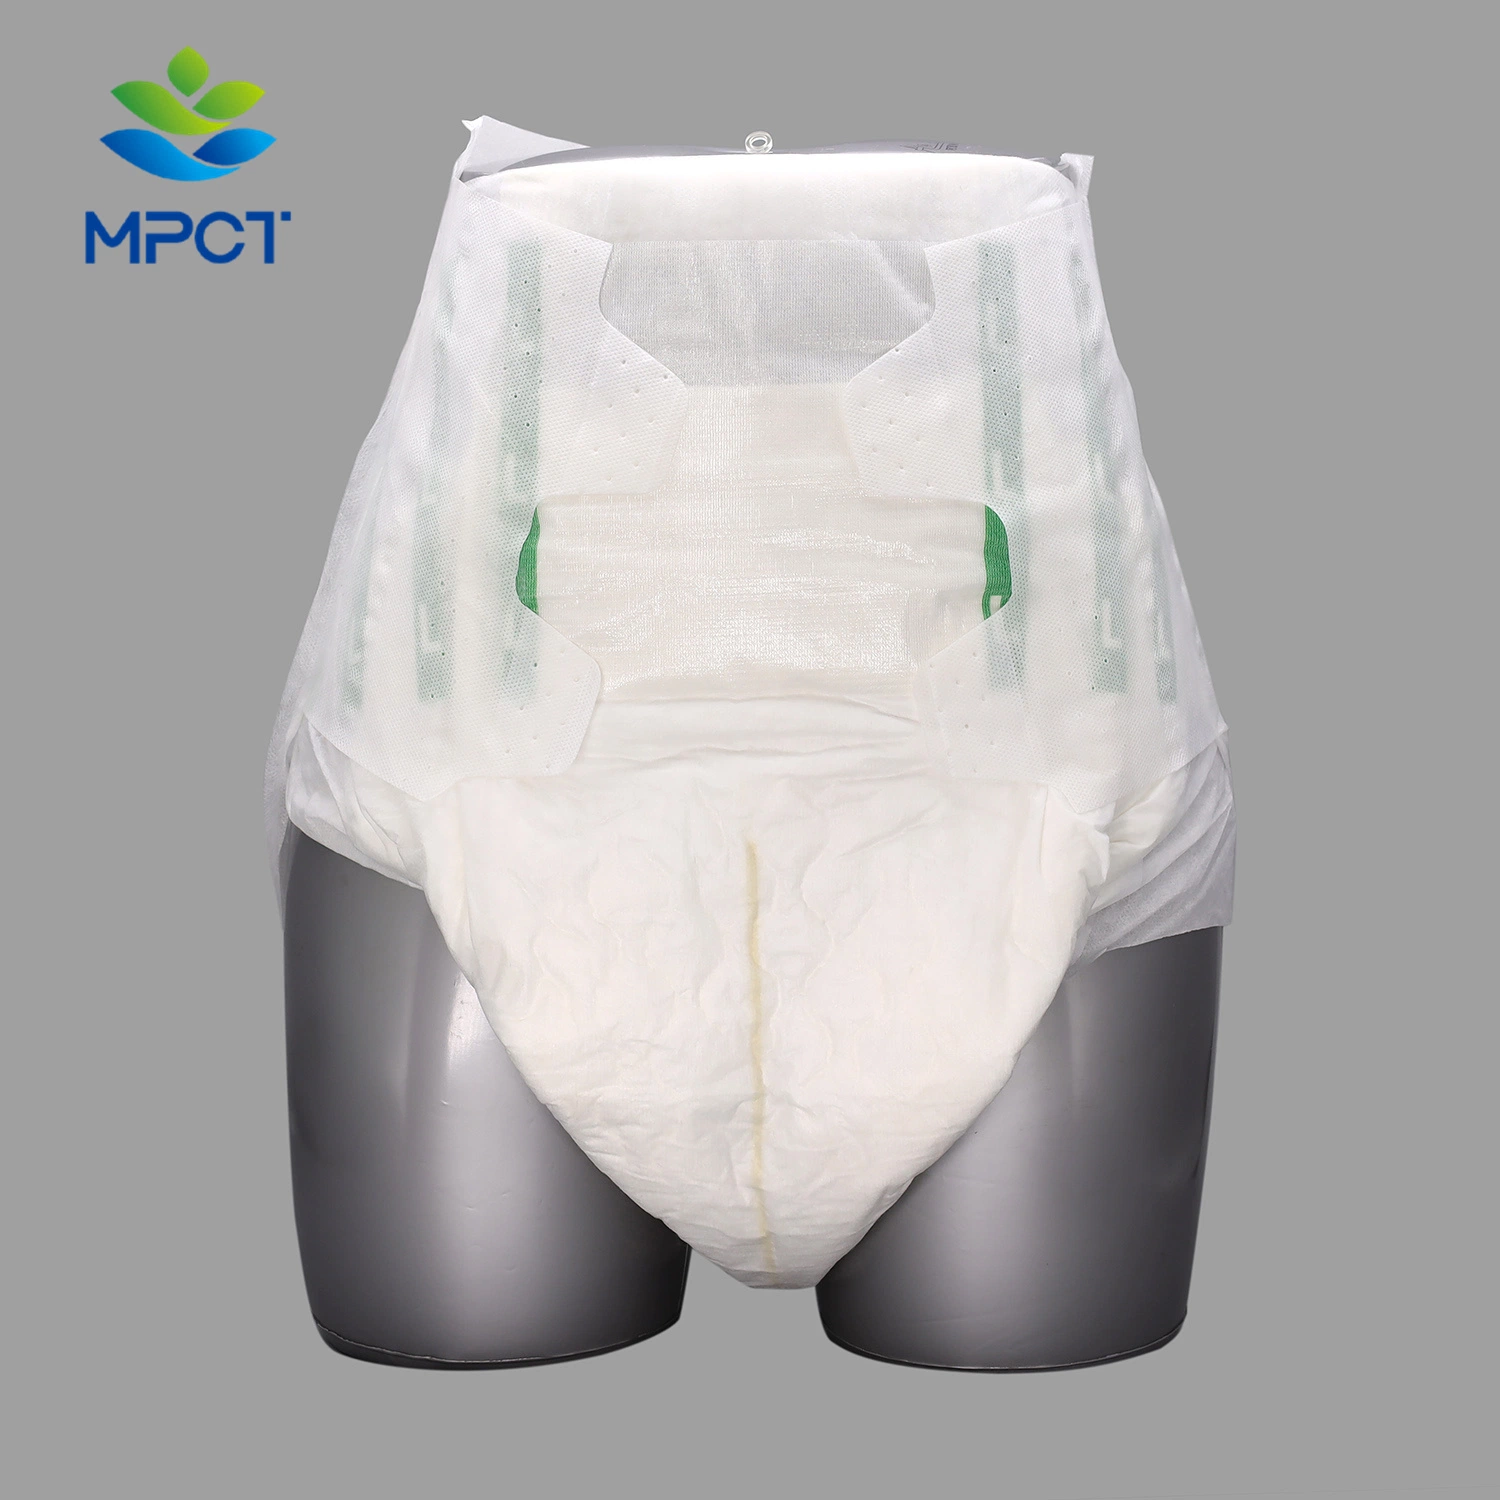 OEM/ODM Nurse Adult Super Absorption Printed Hospital Disposable Adult Diapers Hot Products